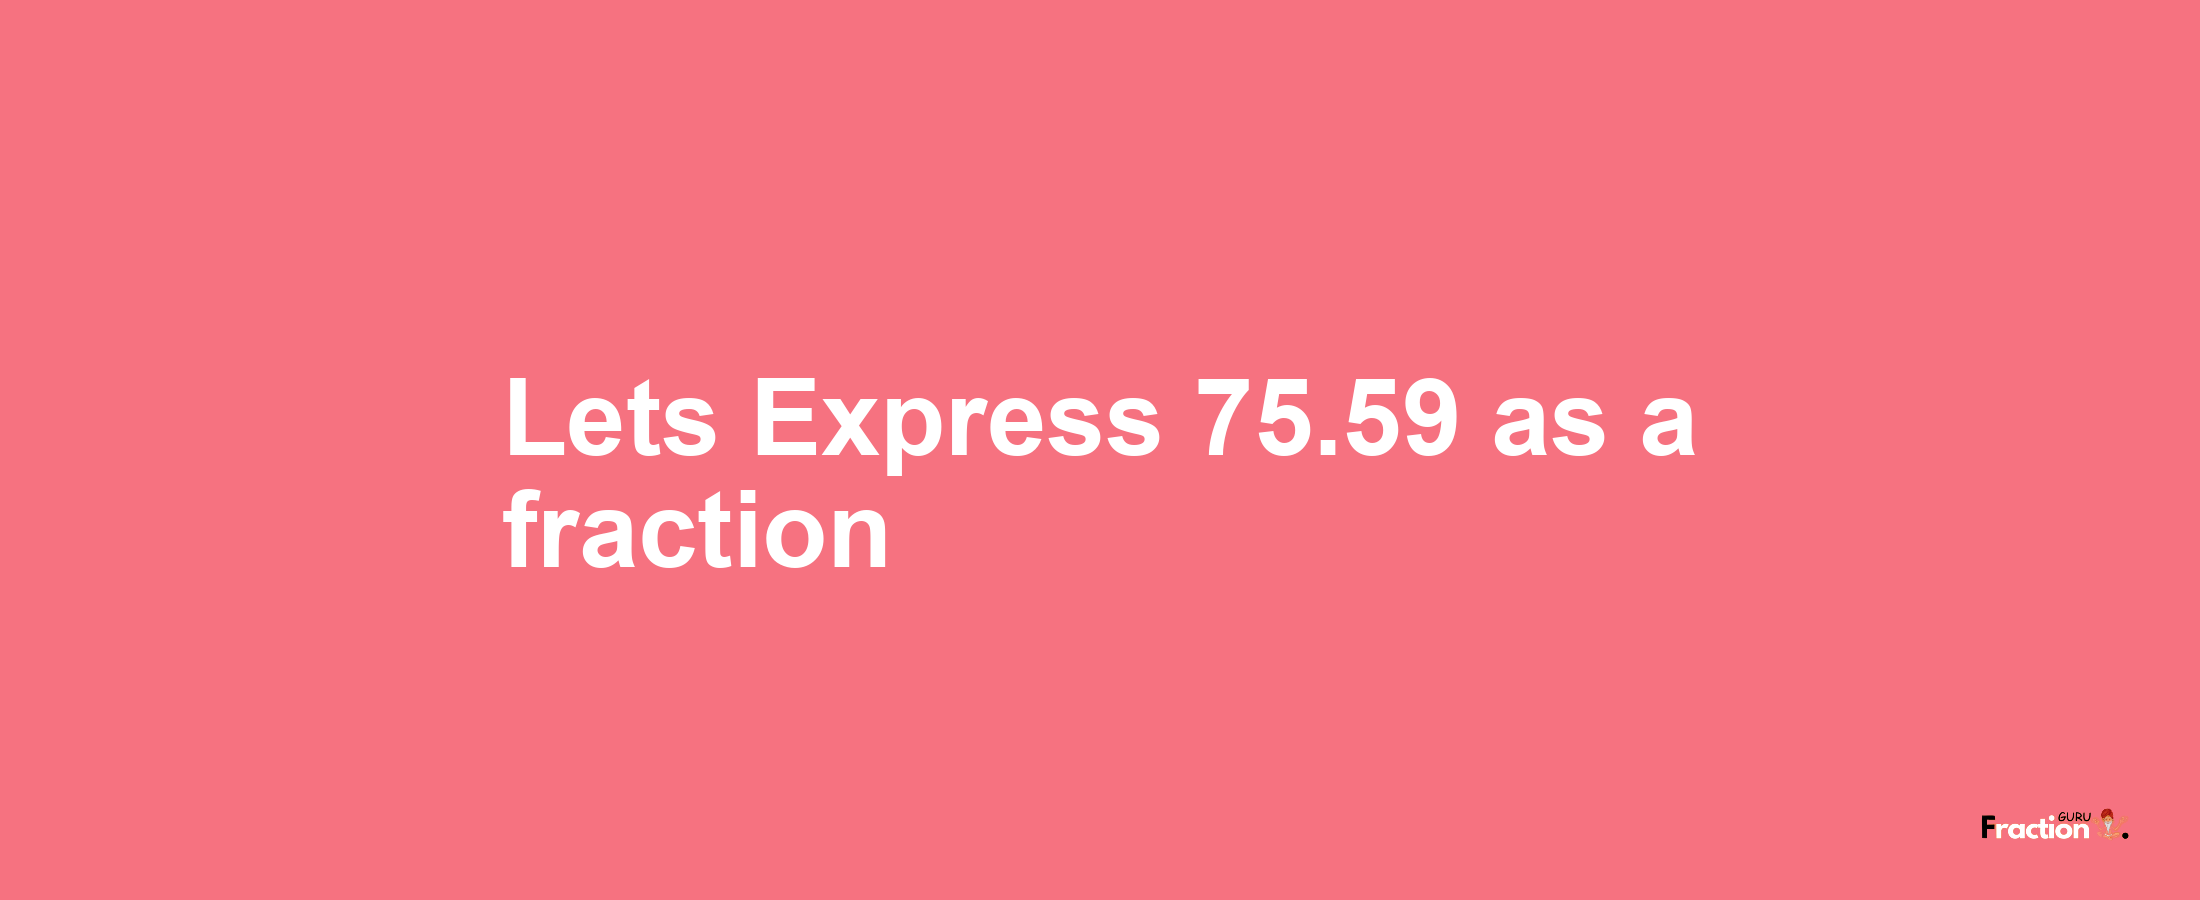 Lets Express 75.59 as afraction